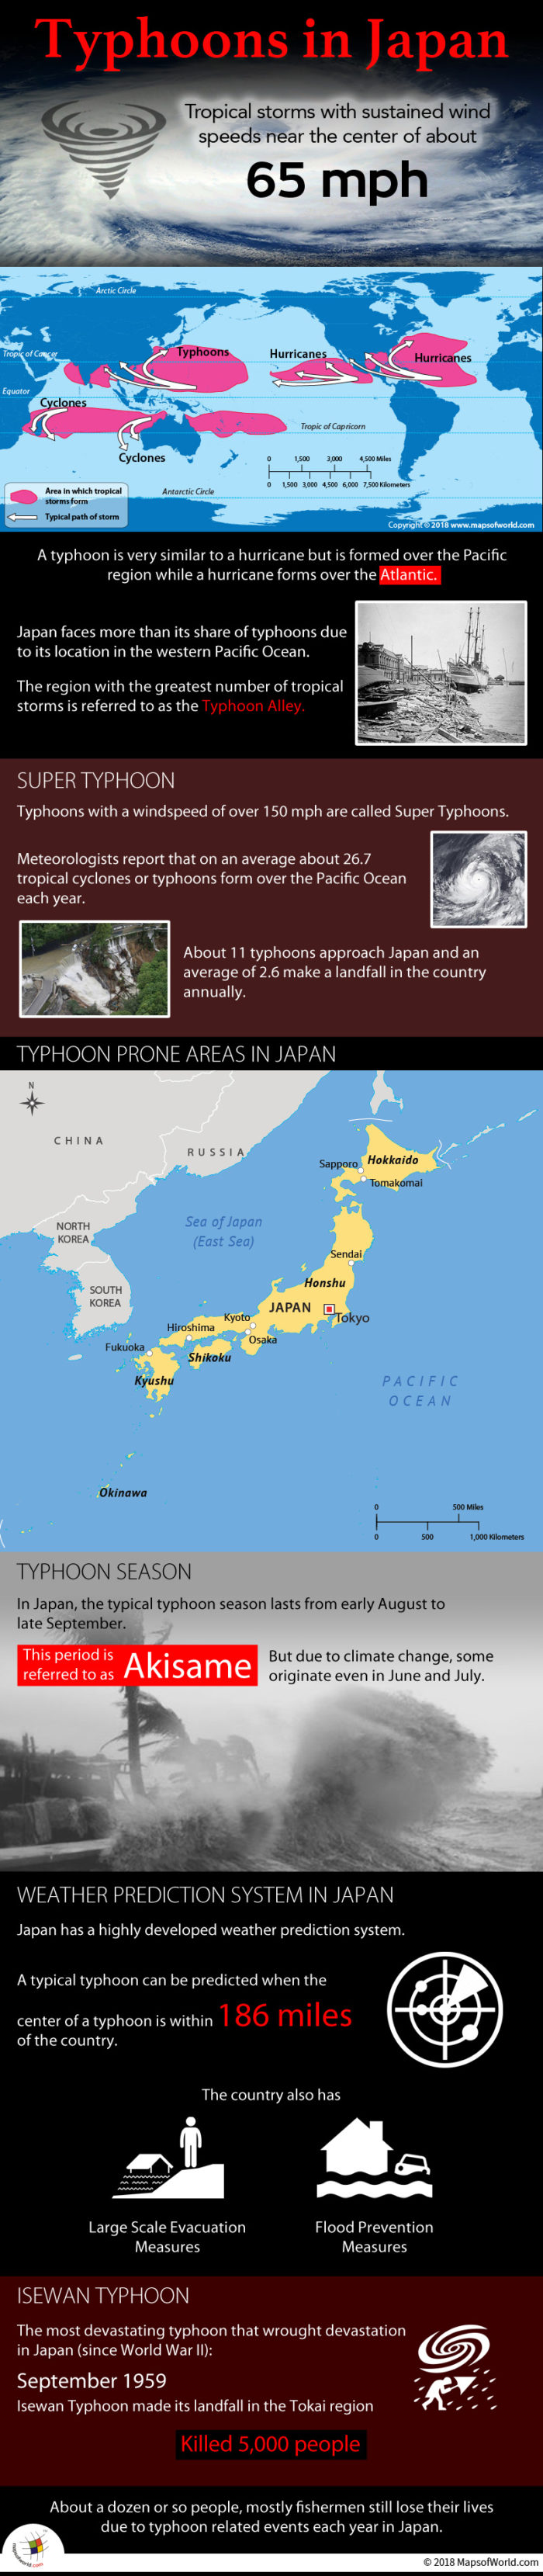 Infographic elaborating reason why typhoons occur in Japan.